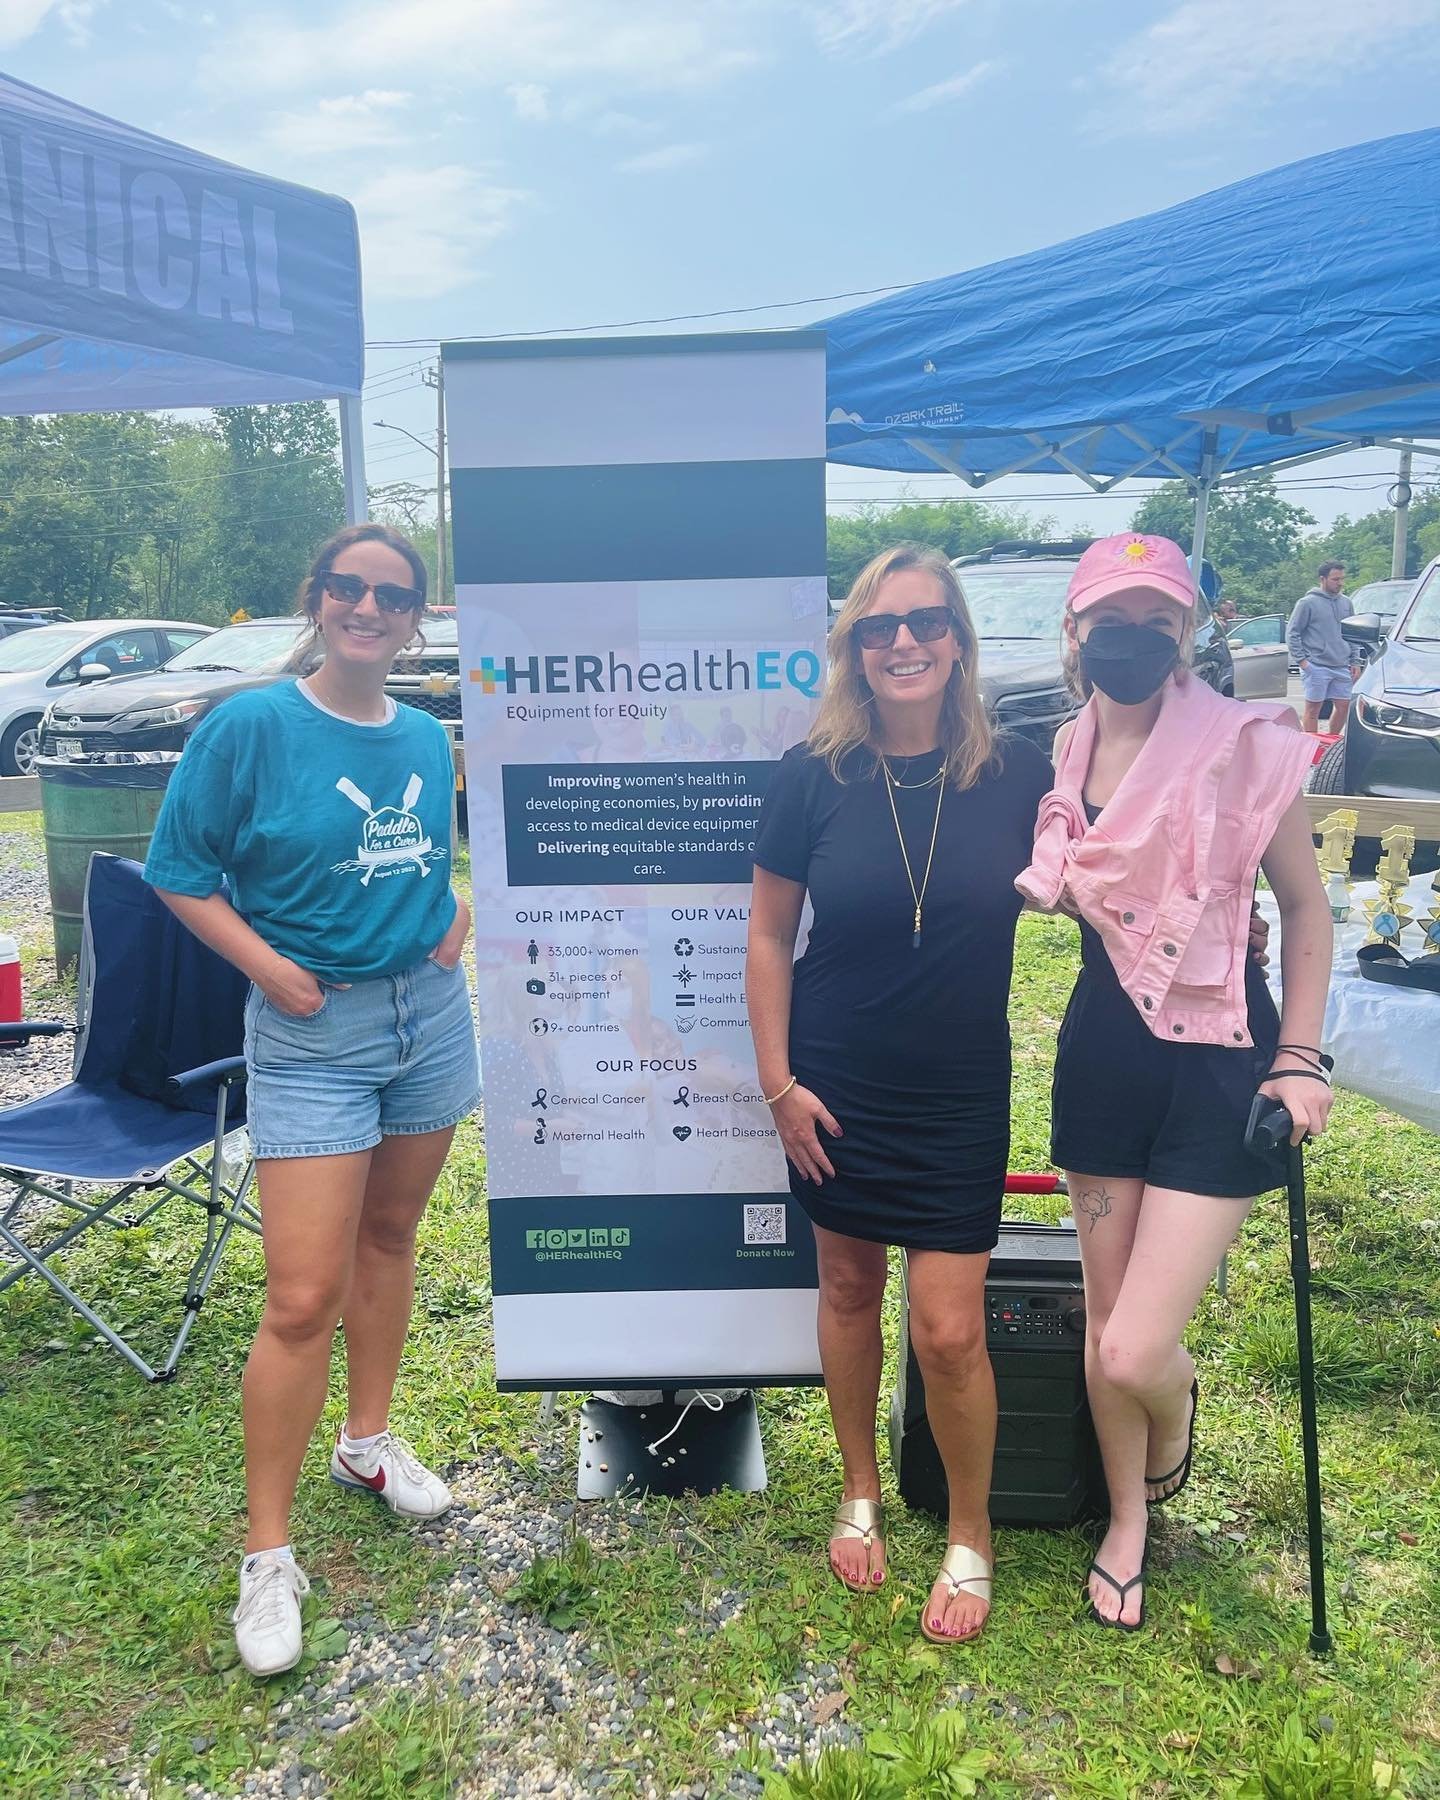 got to attend the second annual paddle board race for @HERhealthEQ! excited to hear the final numbers for how many cervical cancer screenings can be performed from today&rsquo;s fundraiser!